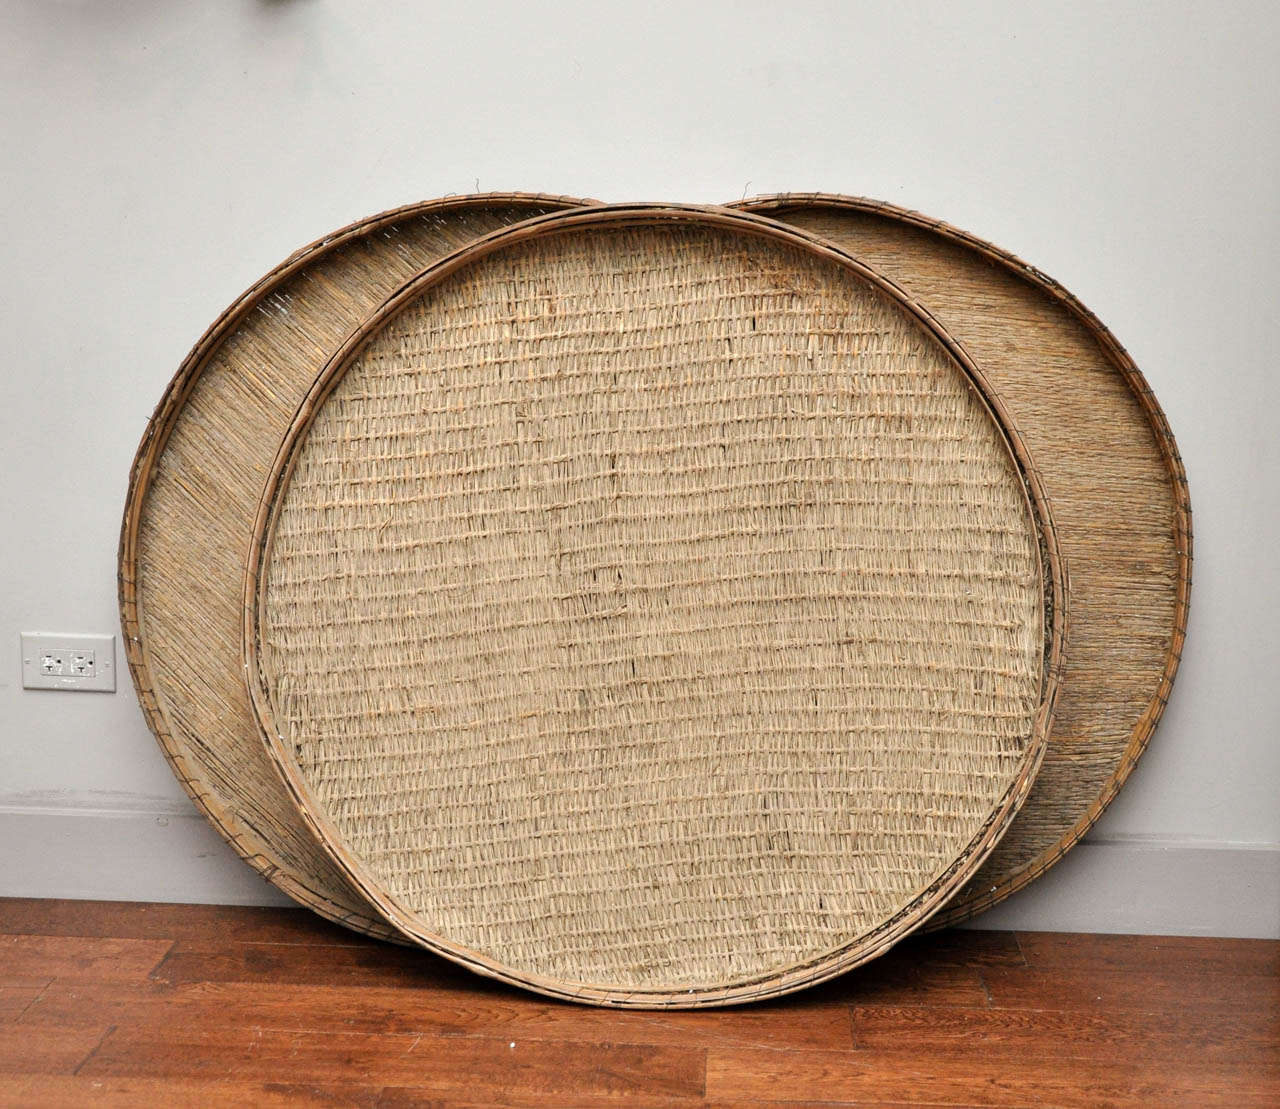 Items are antique bamboo straining baskets used during the preparation and serving of Japanese cuisine. Sold as a collection of three.